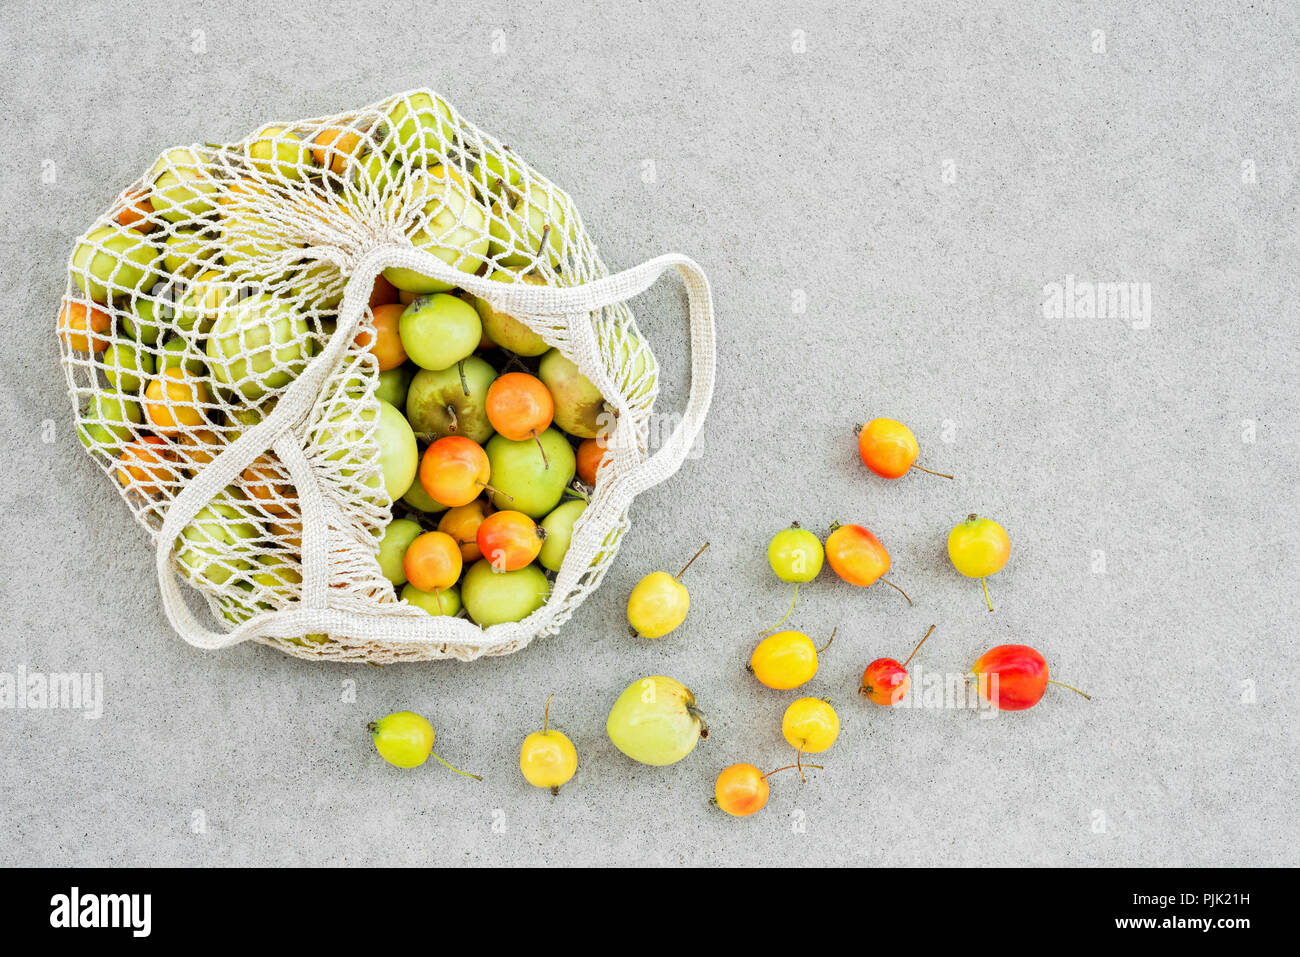 Mesh bag full of colorful apples from the garden, on gray concrete background. Stock Photo